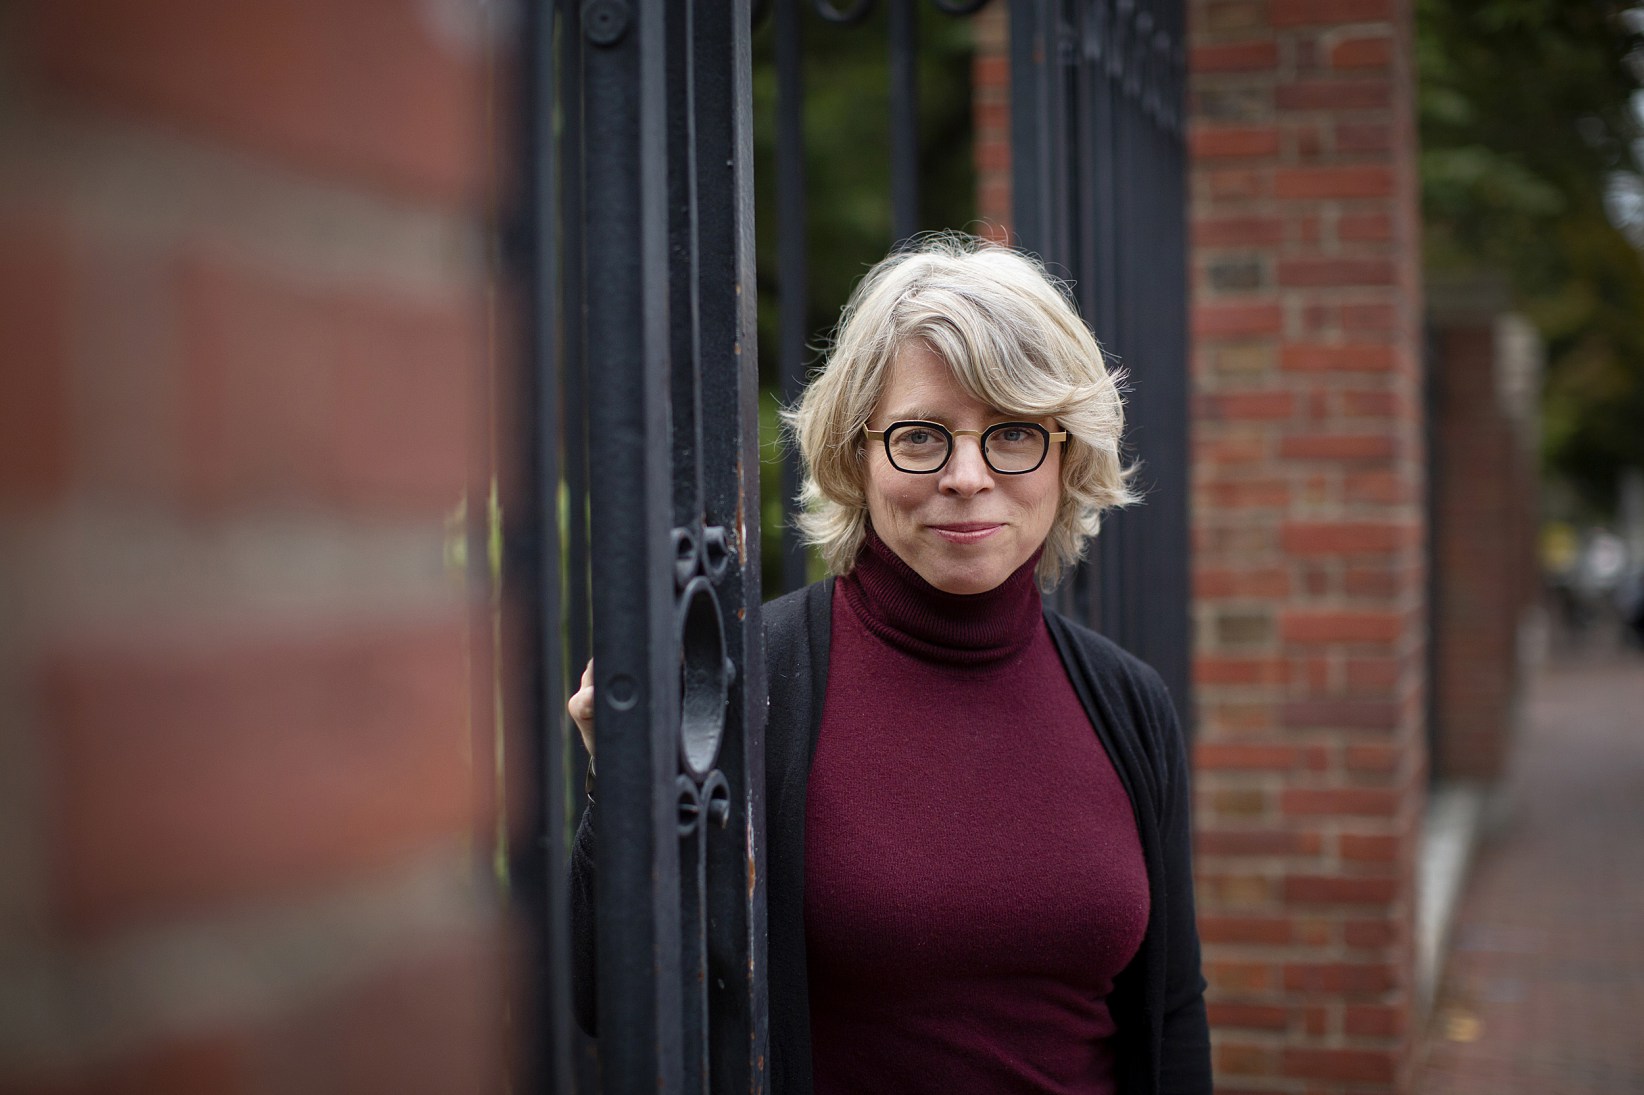 Jill Lepore is the David Woods Kemper ’41 Professor of American History at Harvard University. She is pictured along the gates of Harvard Yard. Stephanie Mitchell/Harvard Staff Photographer